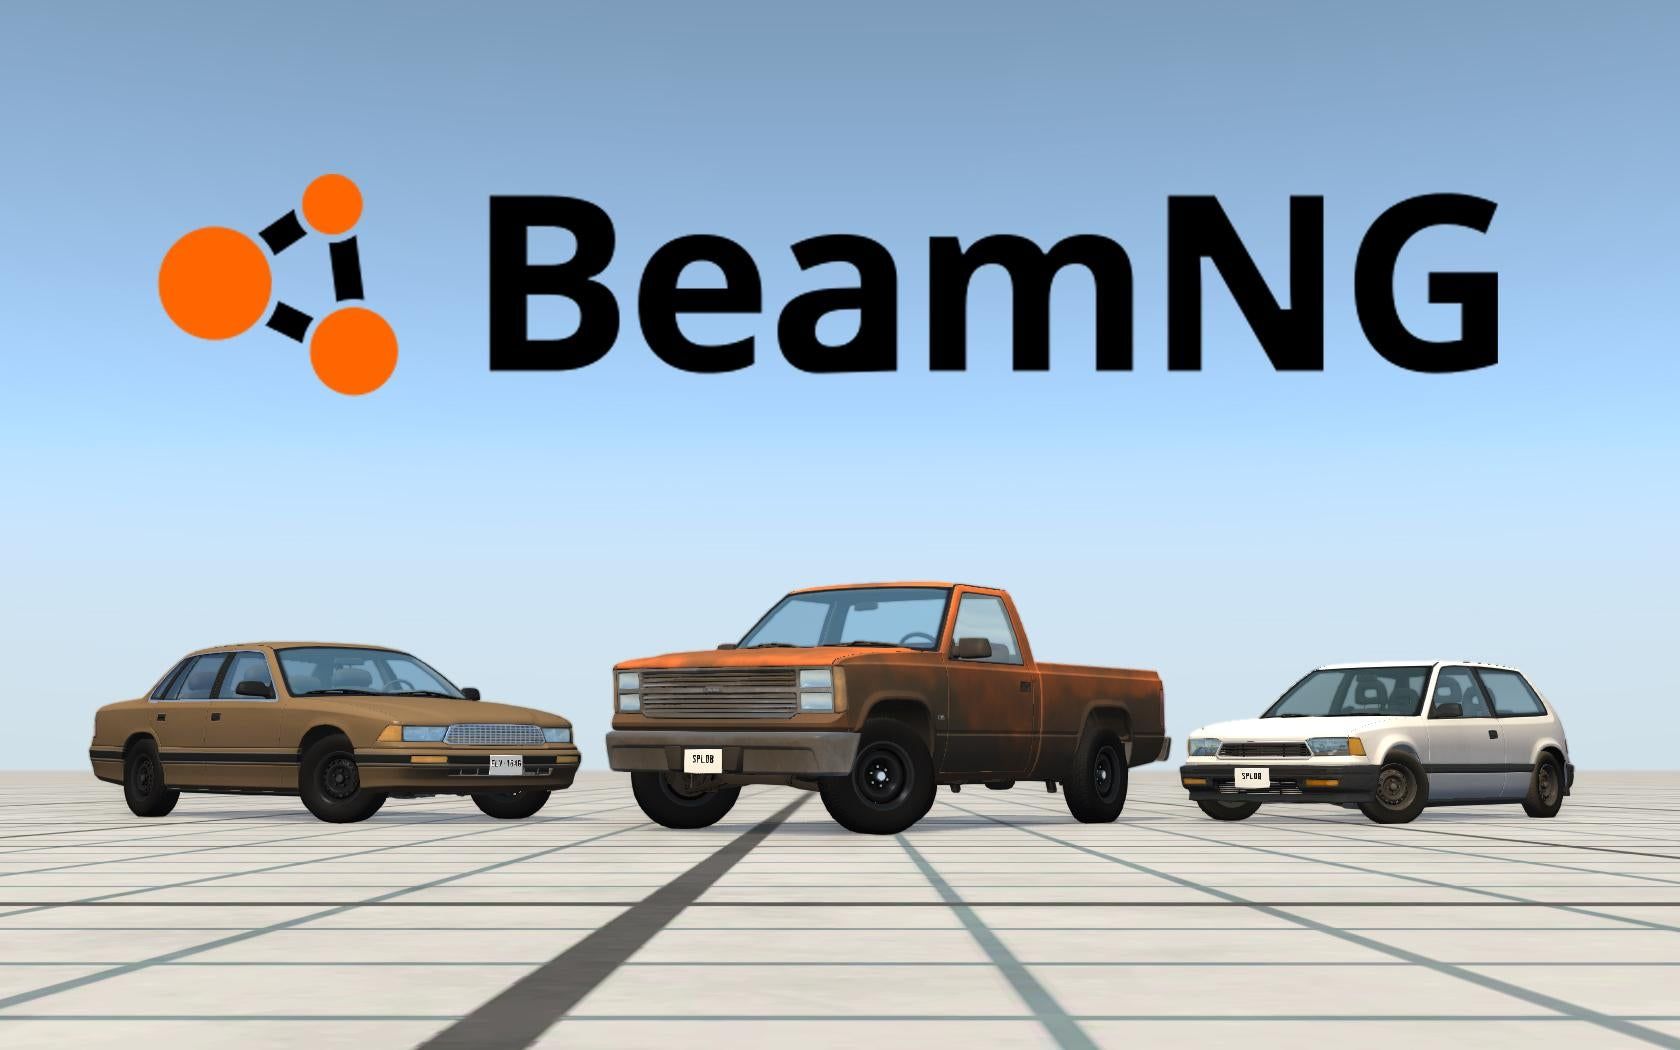 download beamng drive for mac